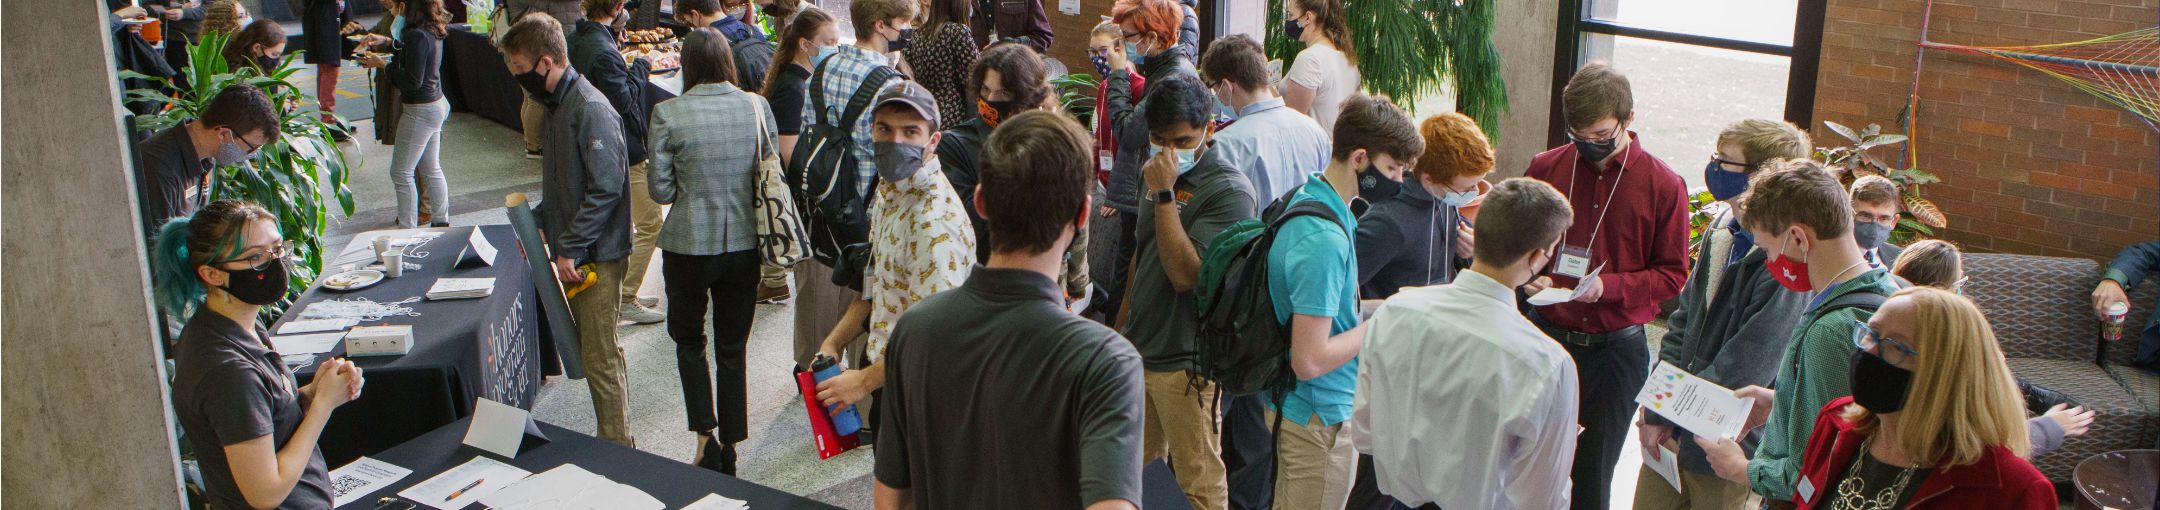 A large group of students at an orientation gathering